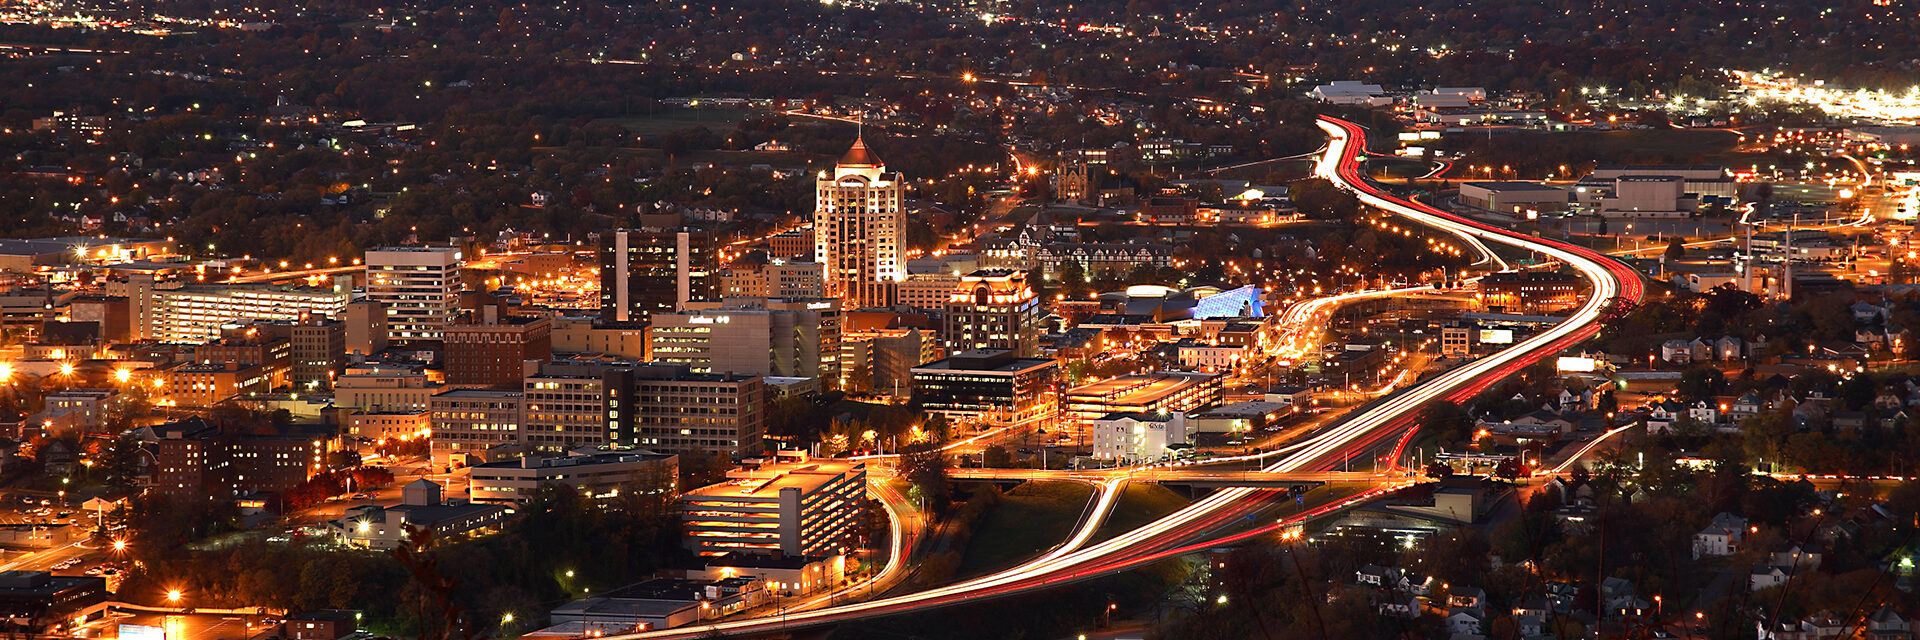 aerial night time view of downtown roanoke